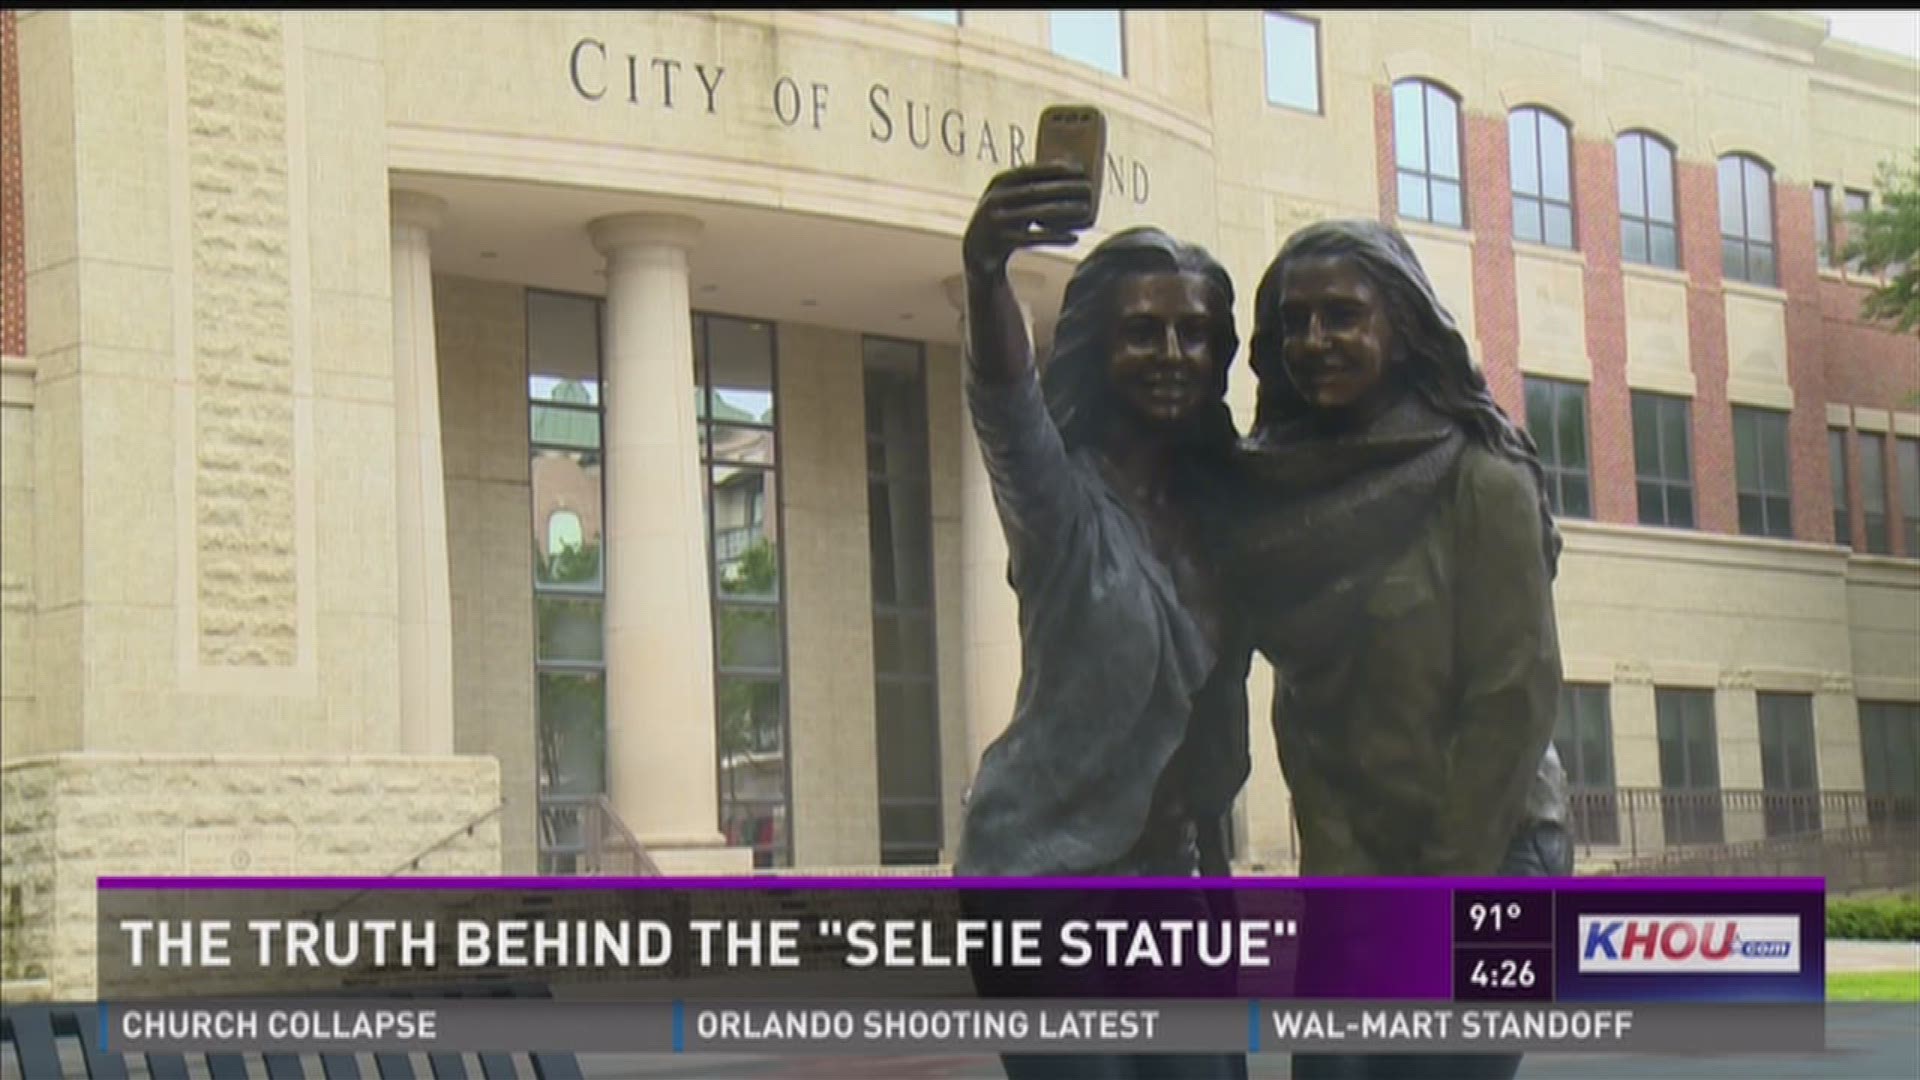 A selfie statue in Sugar Land has been seen around the country. Here's the story behind the statue.